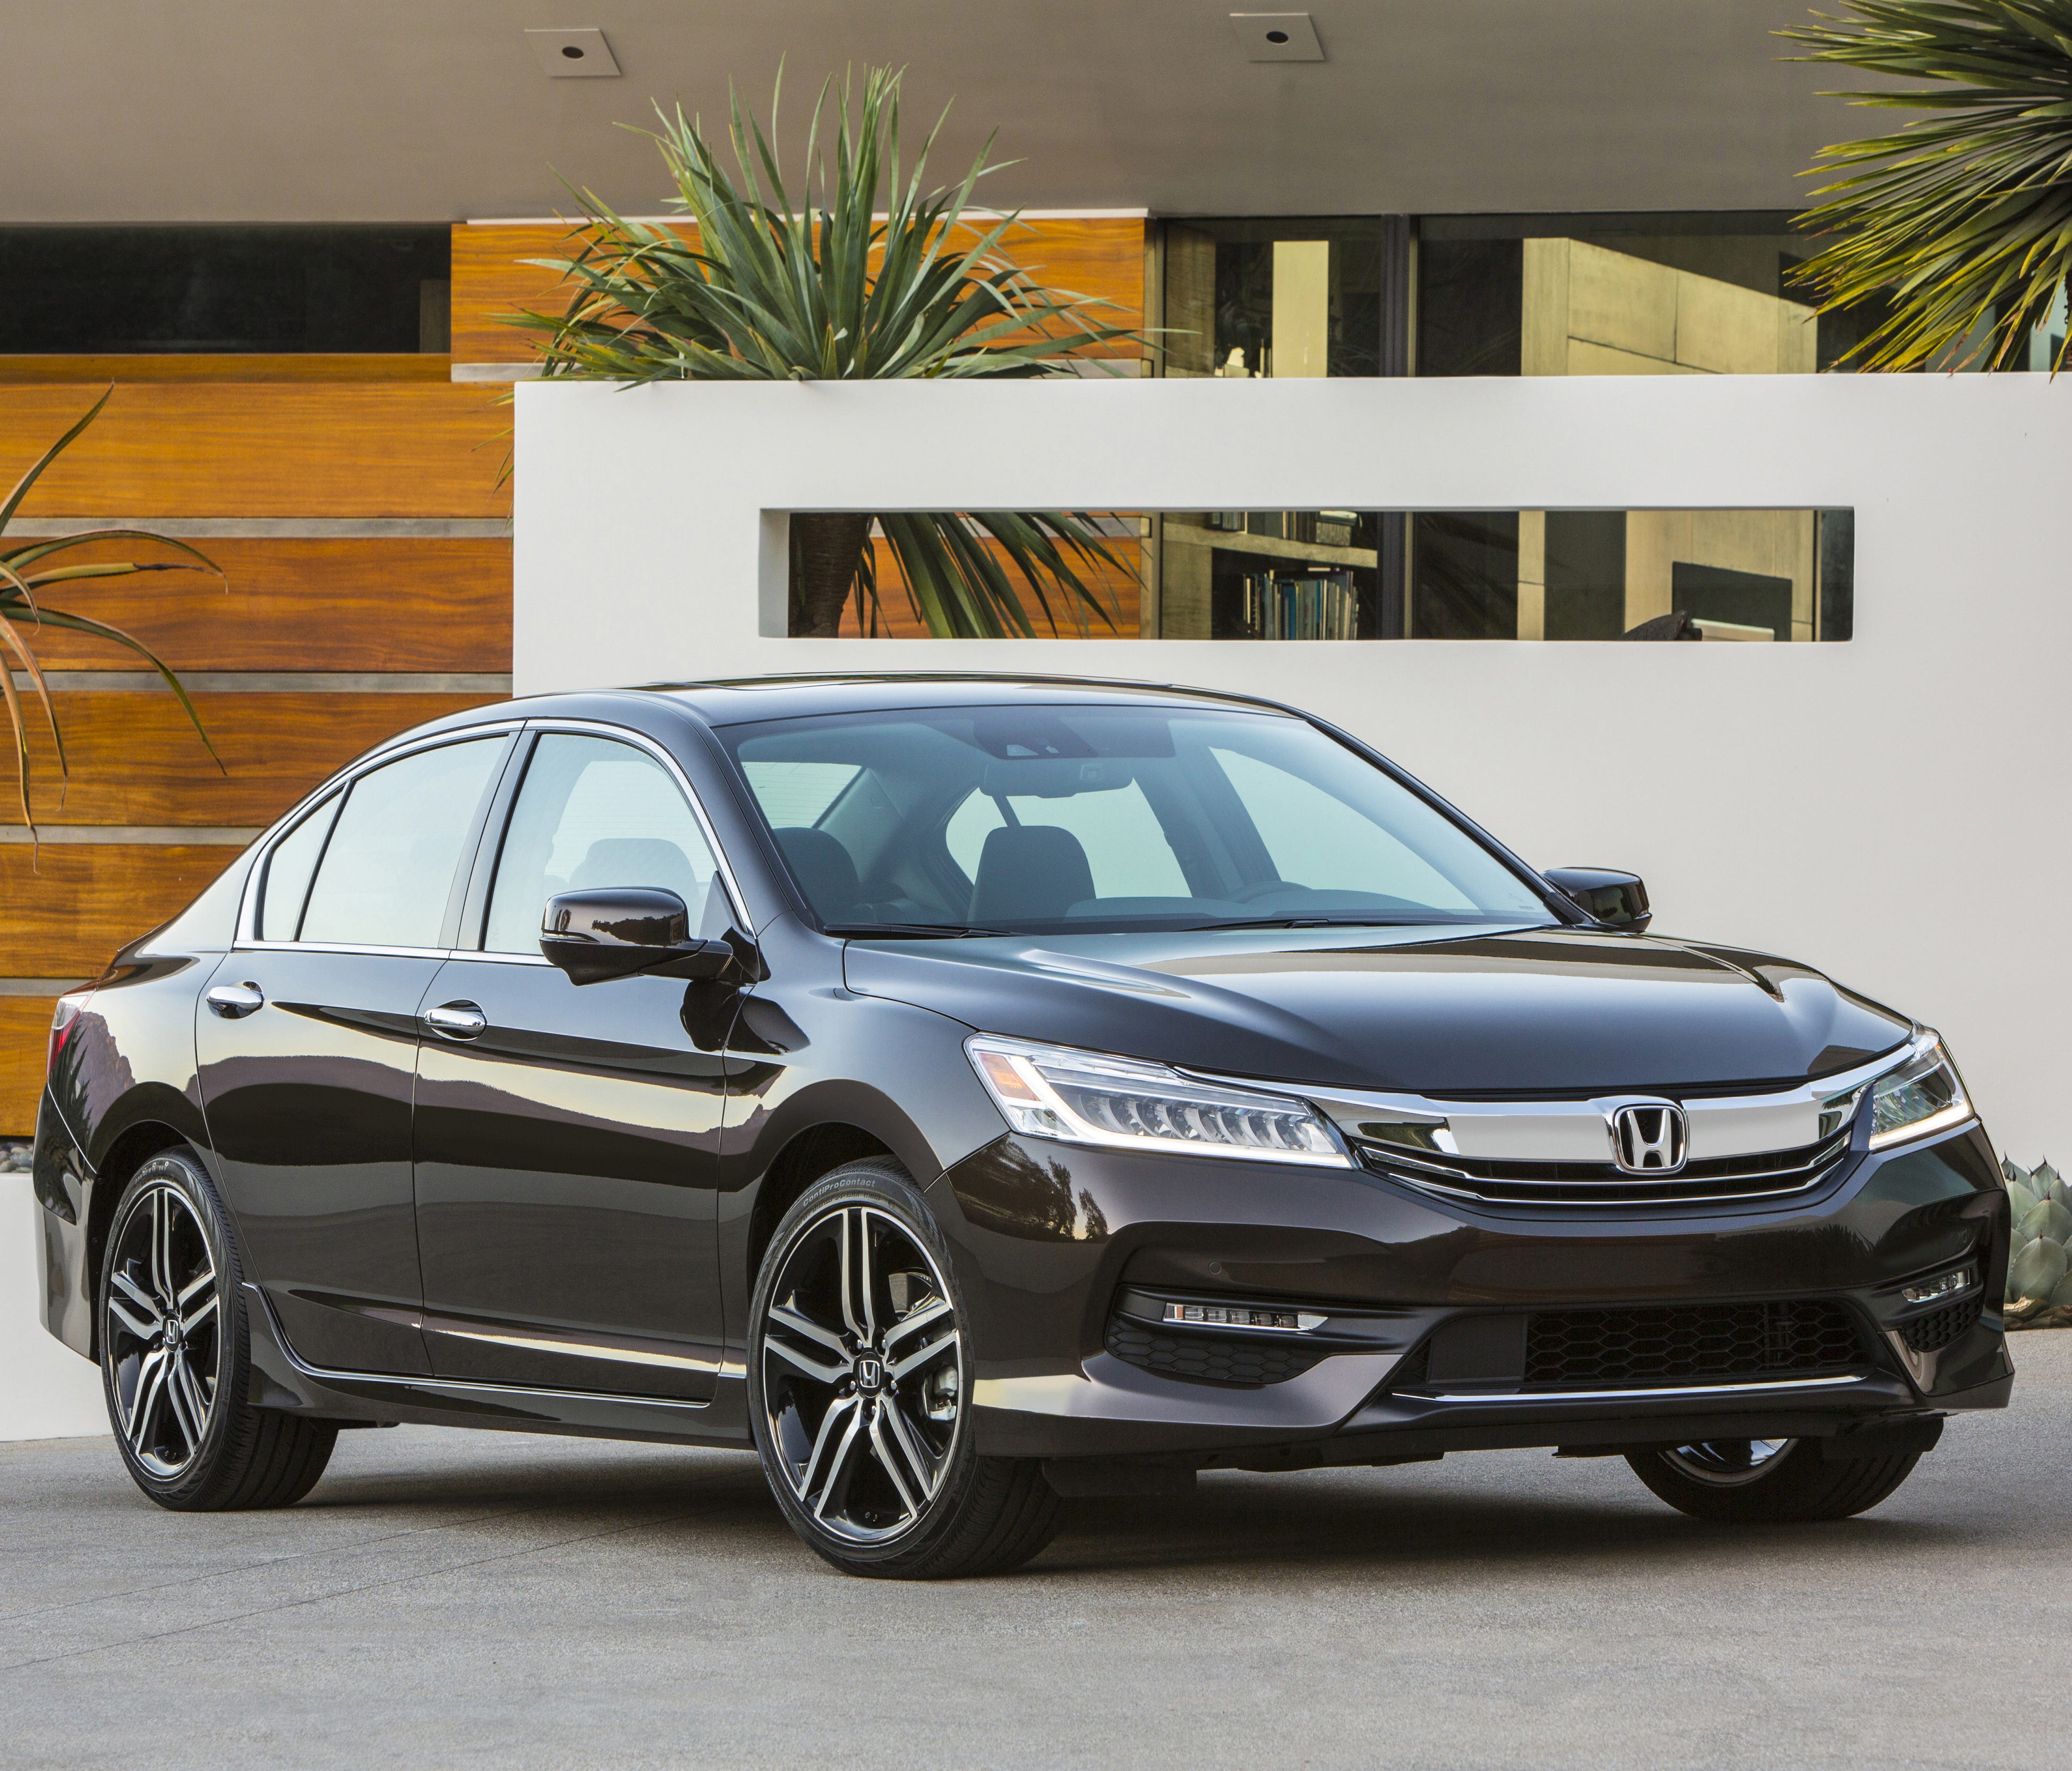 This photo provided by Honda shows the 2017 Honda Accord. Edmunds reports that the midsize sedan currently has discounts in the $5,700 range, depending on package and region. (Courtesy of Honda Motor Co., Inc. via AP)